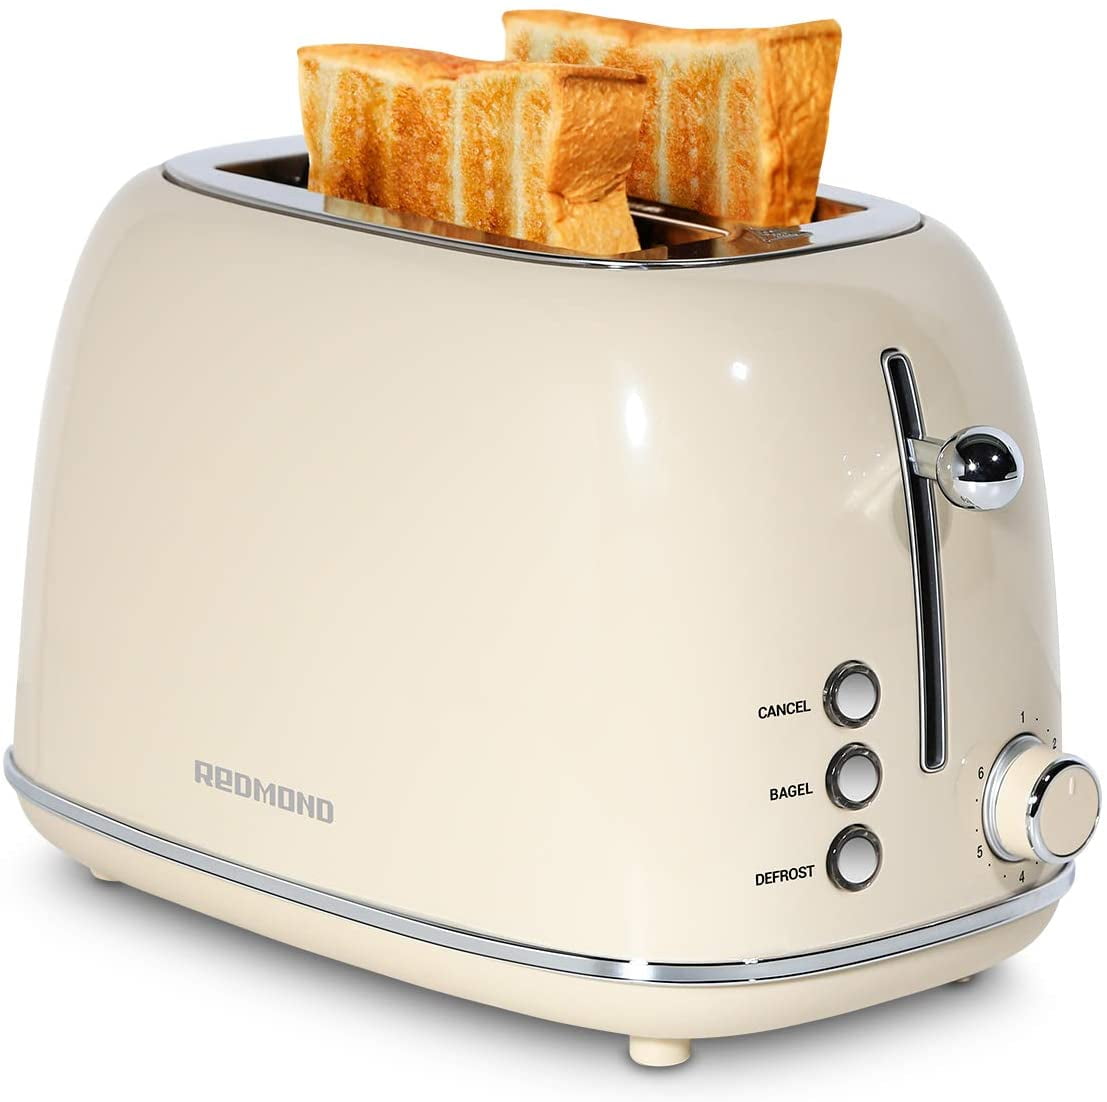 REDMOND 2 Slice Toaster Retro Stainless Steel Toaster with Bagel 